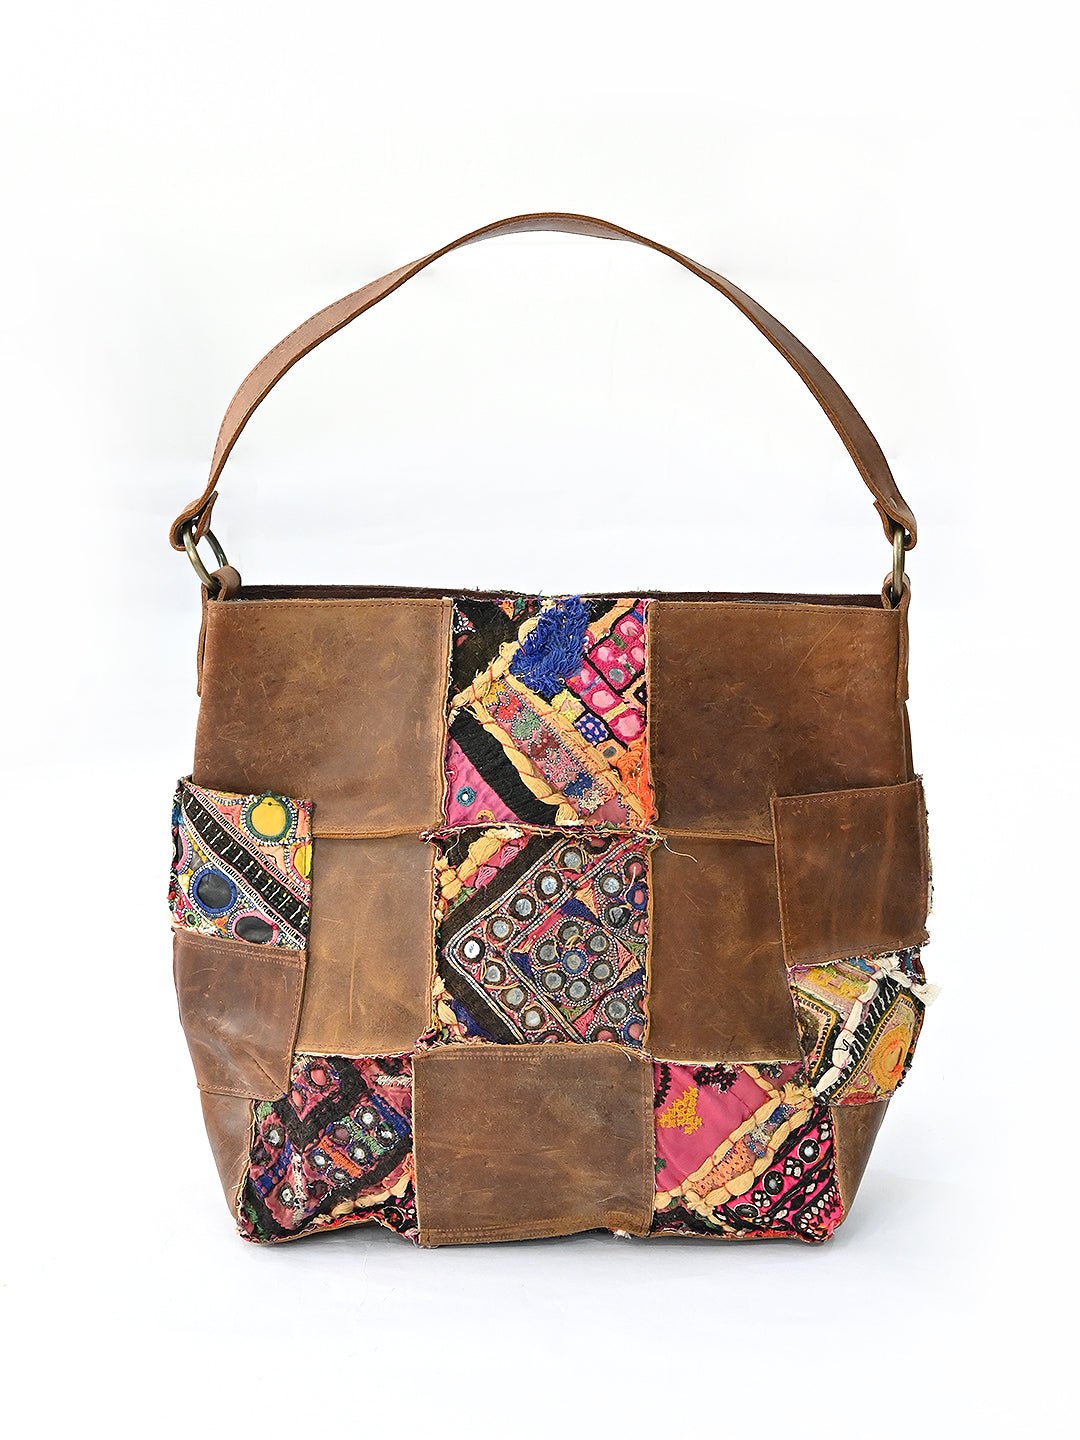 Patchwork Purse - 83 For Sale on 1stDibs | vintage leather patchwork purse, patchwork  purse leather, patchwork bags for sale